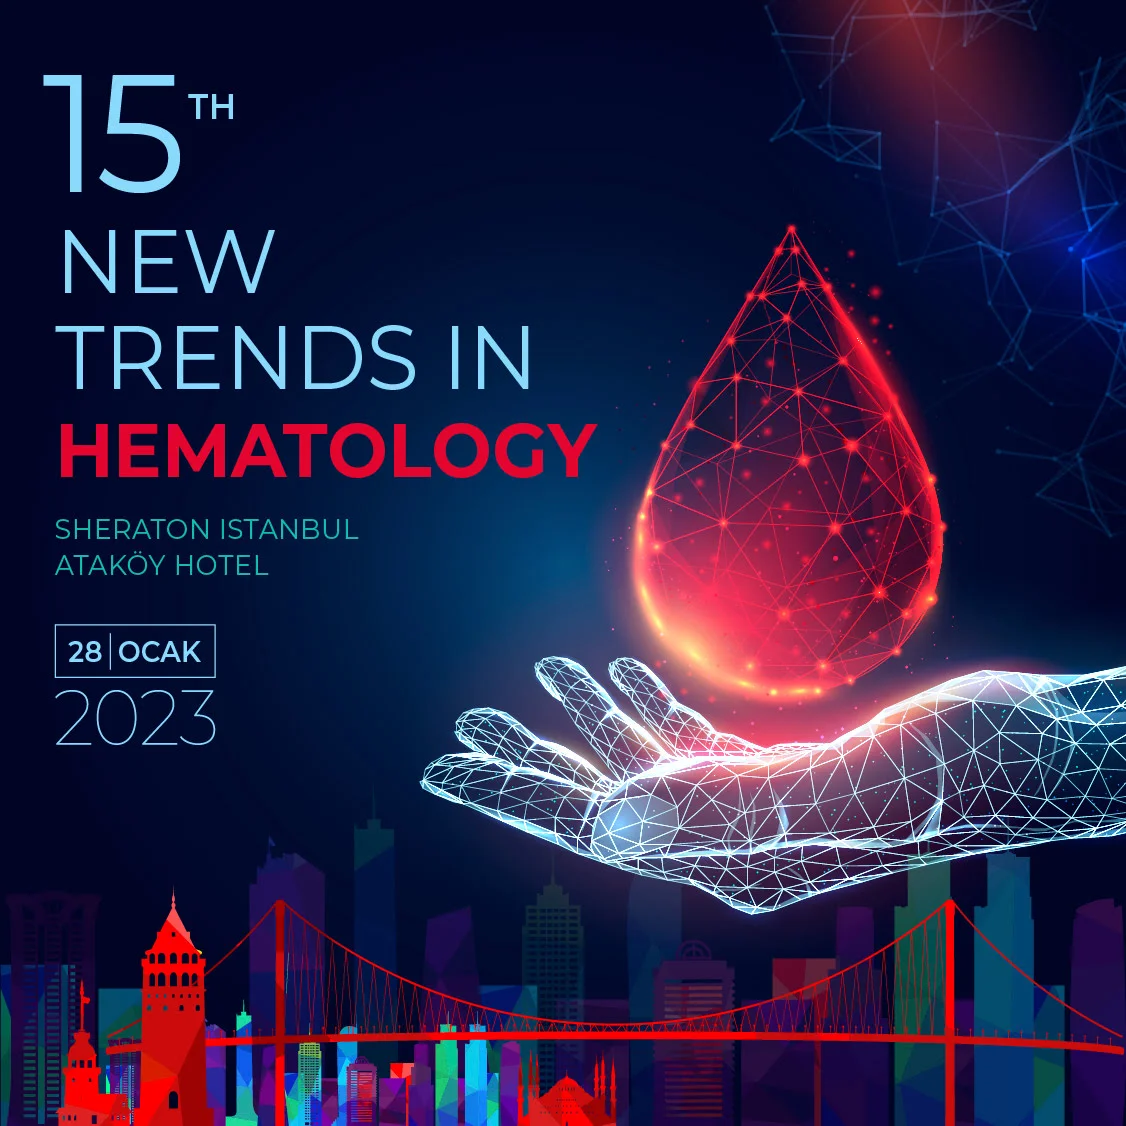 15th New Trends In Hematology